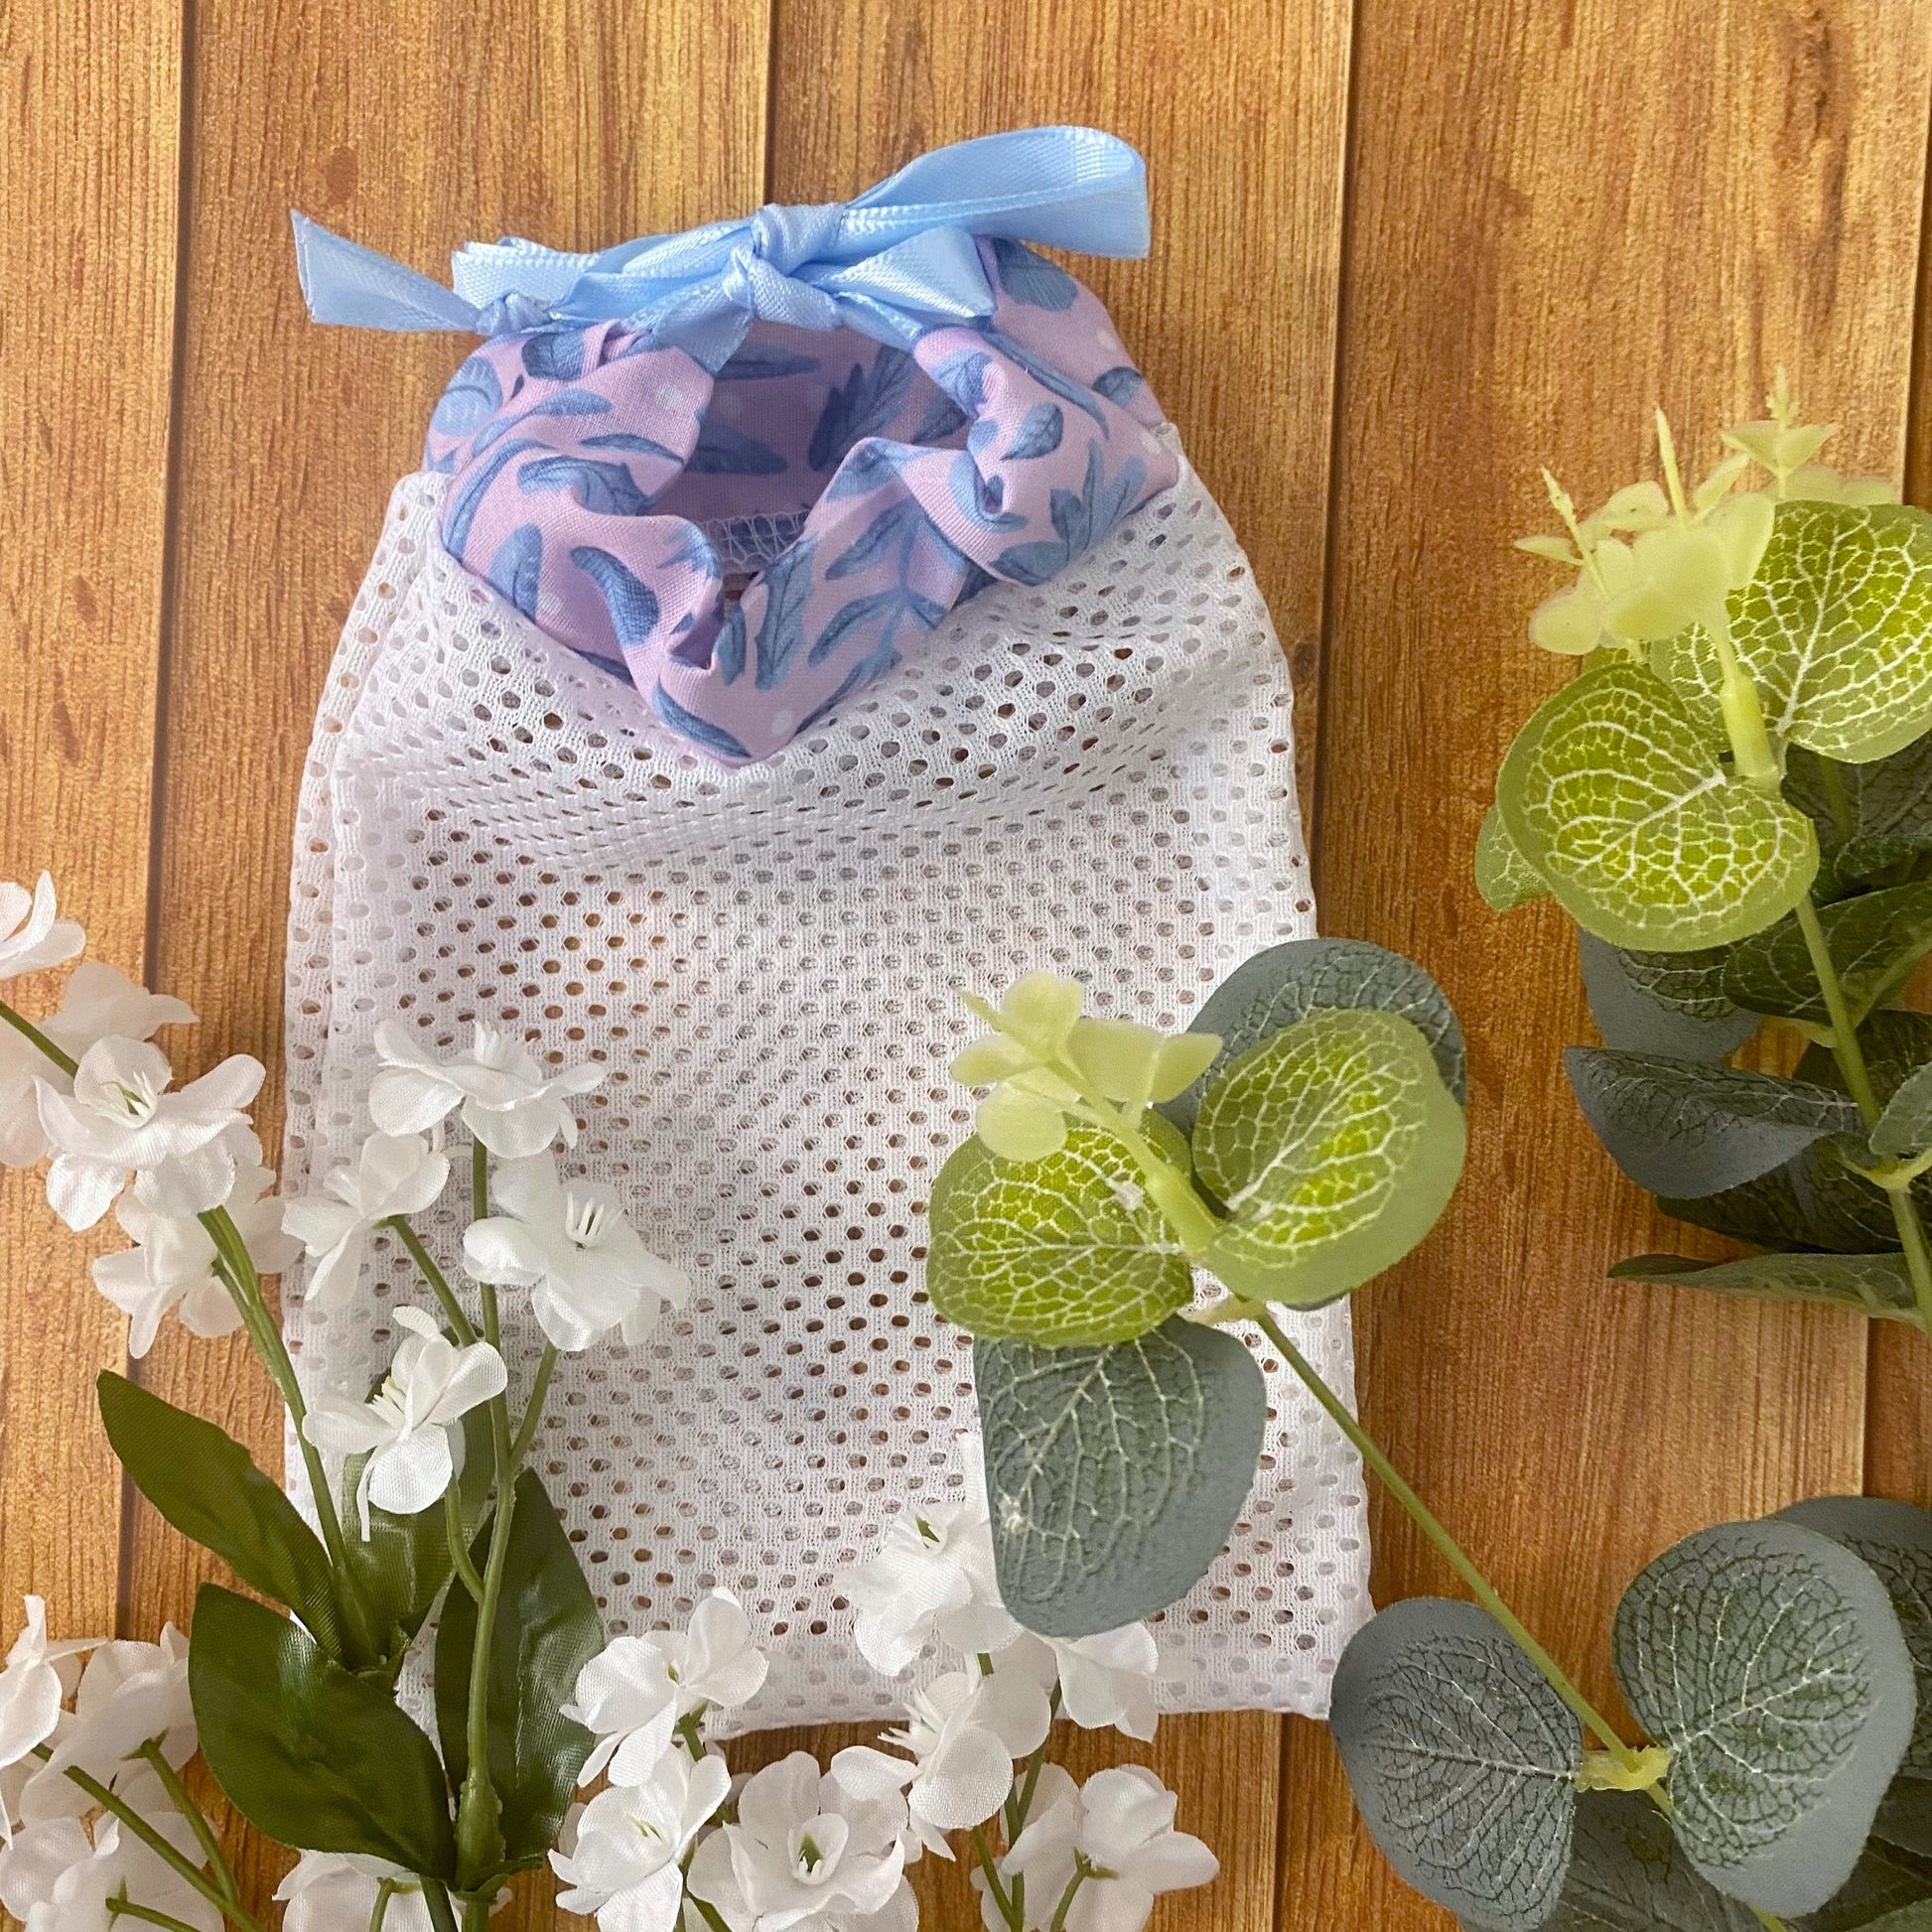 blue and pink foliage pattern on the top of a white mesh washbag amongst the green and white foliage